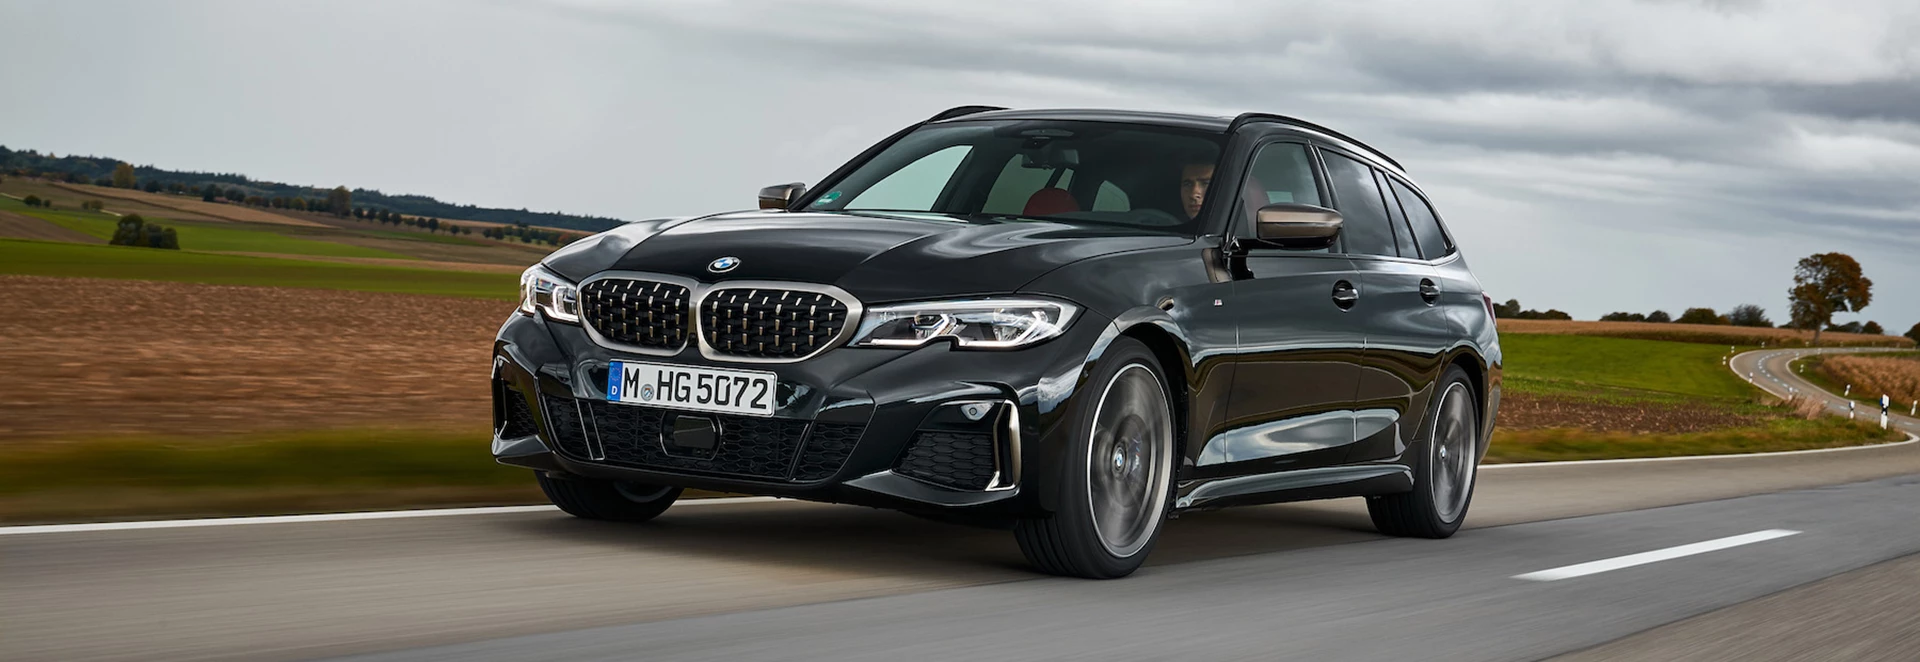 BMW introduces powerful flagship diesel engine to its 3 Series range